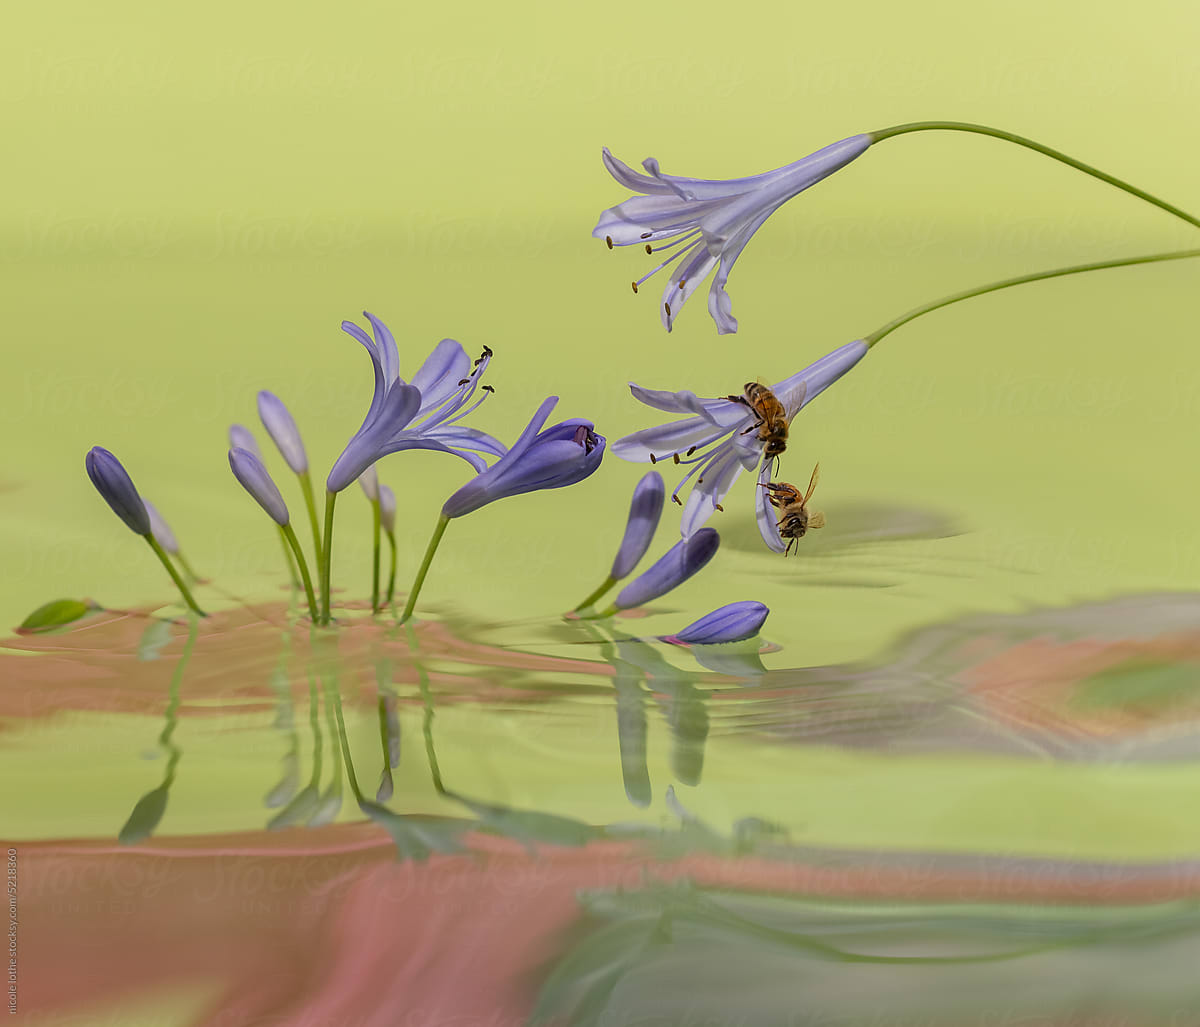 Two bees on flower over psychedelic water.